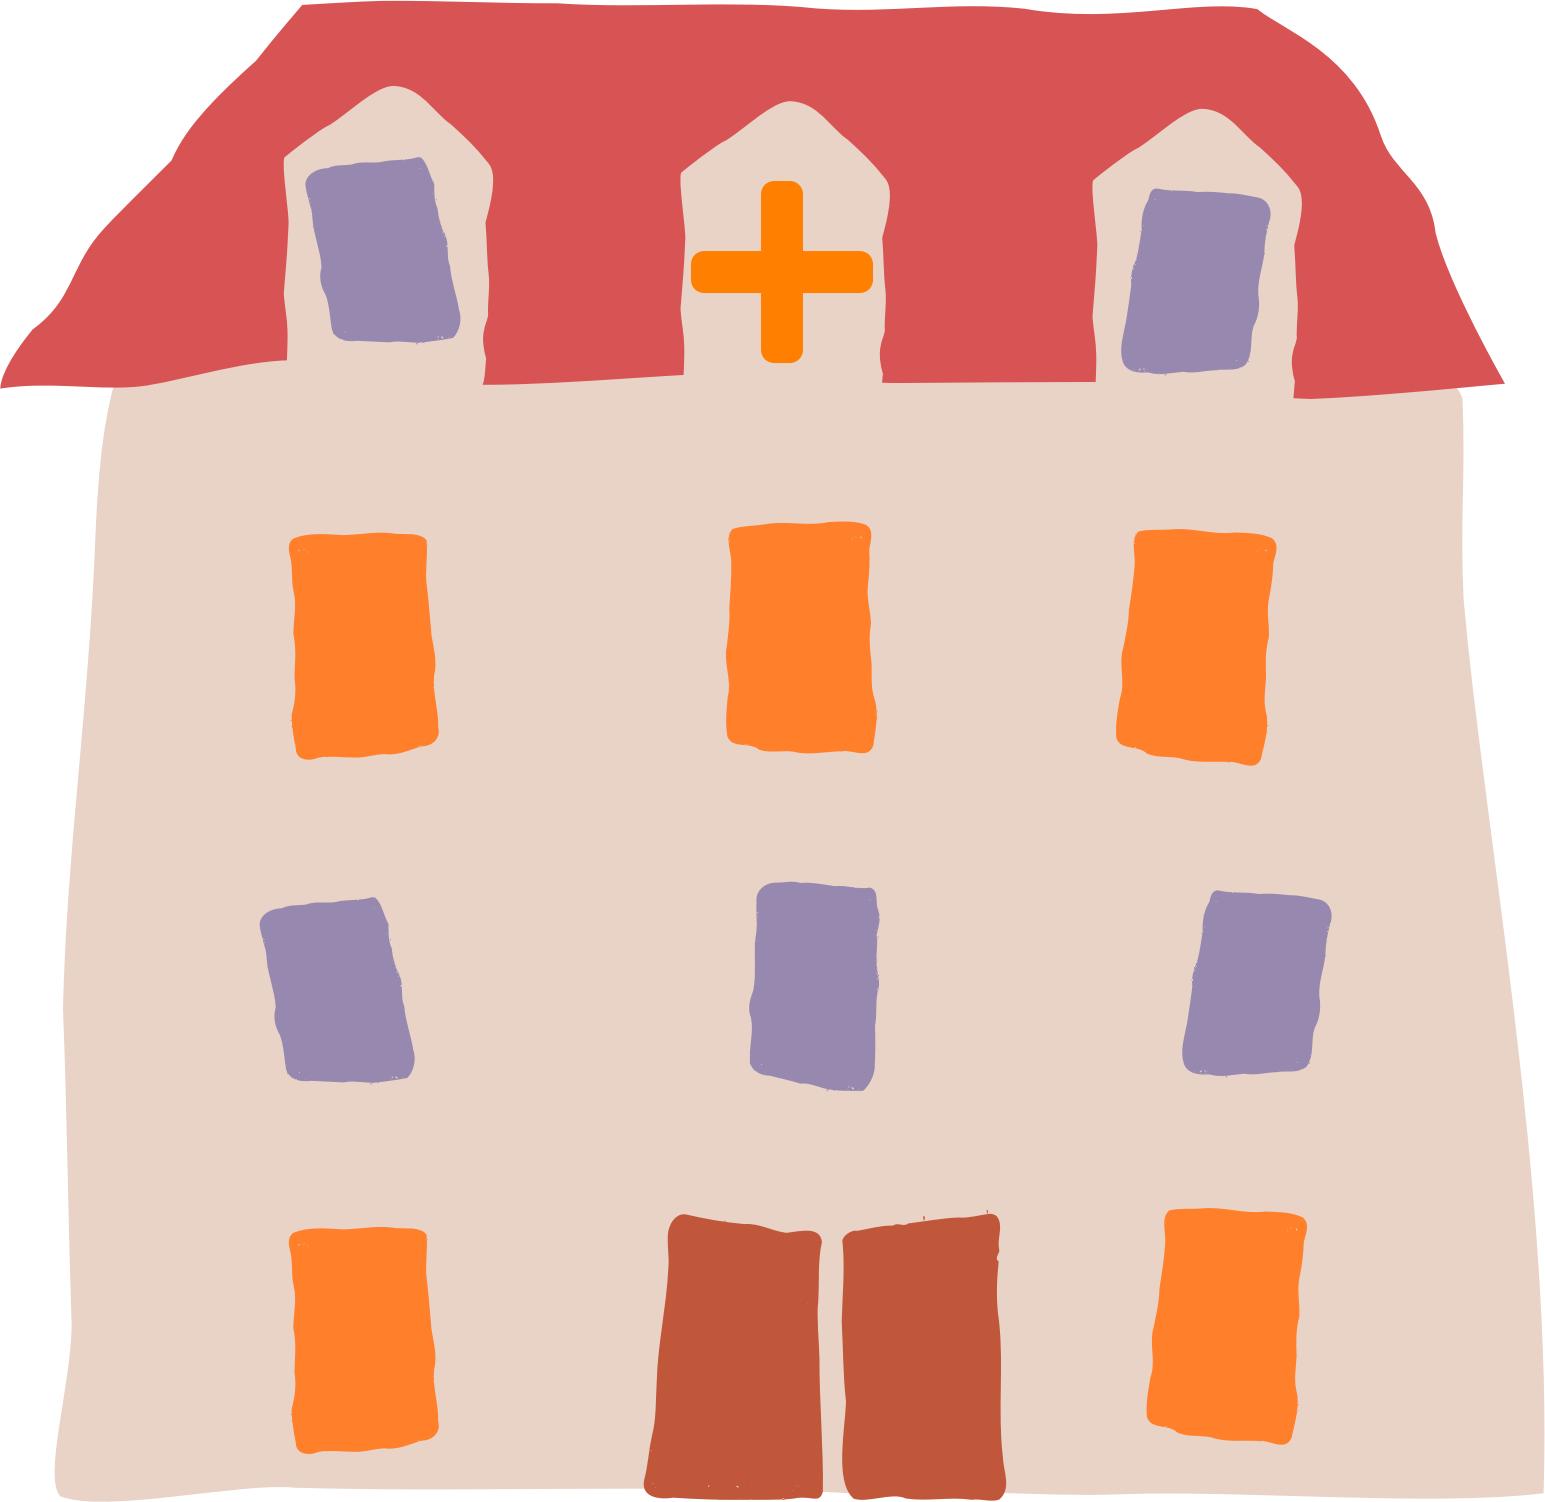 Crooked hospital PNG icons